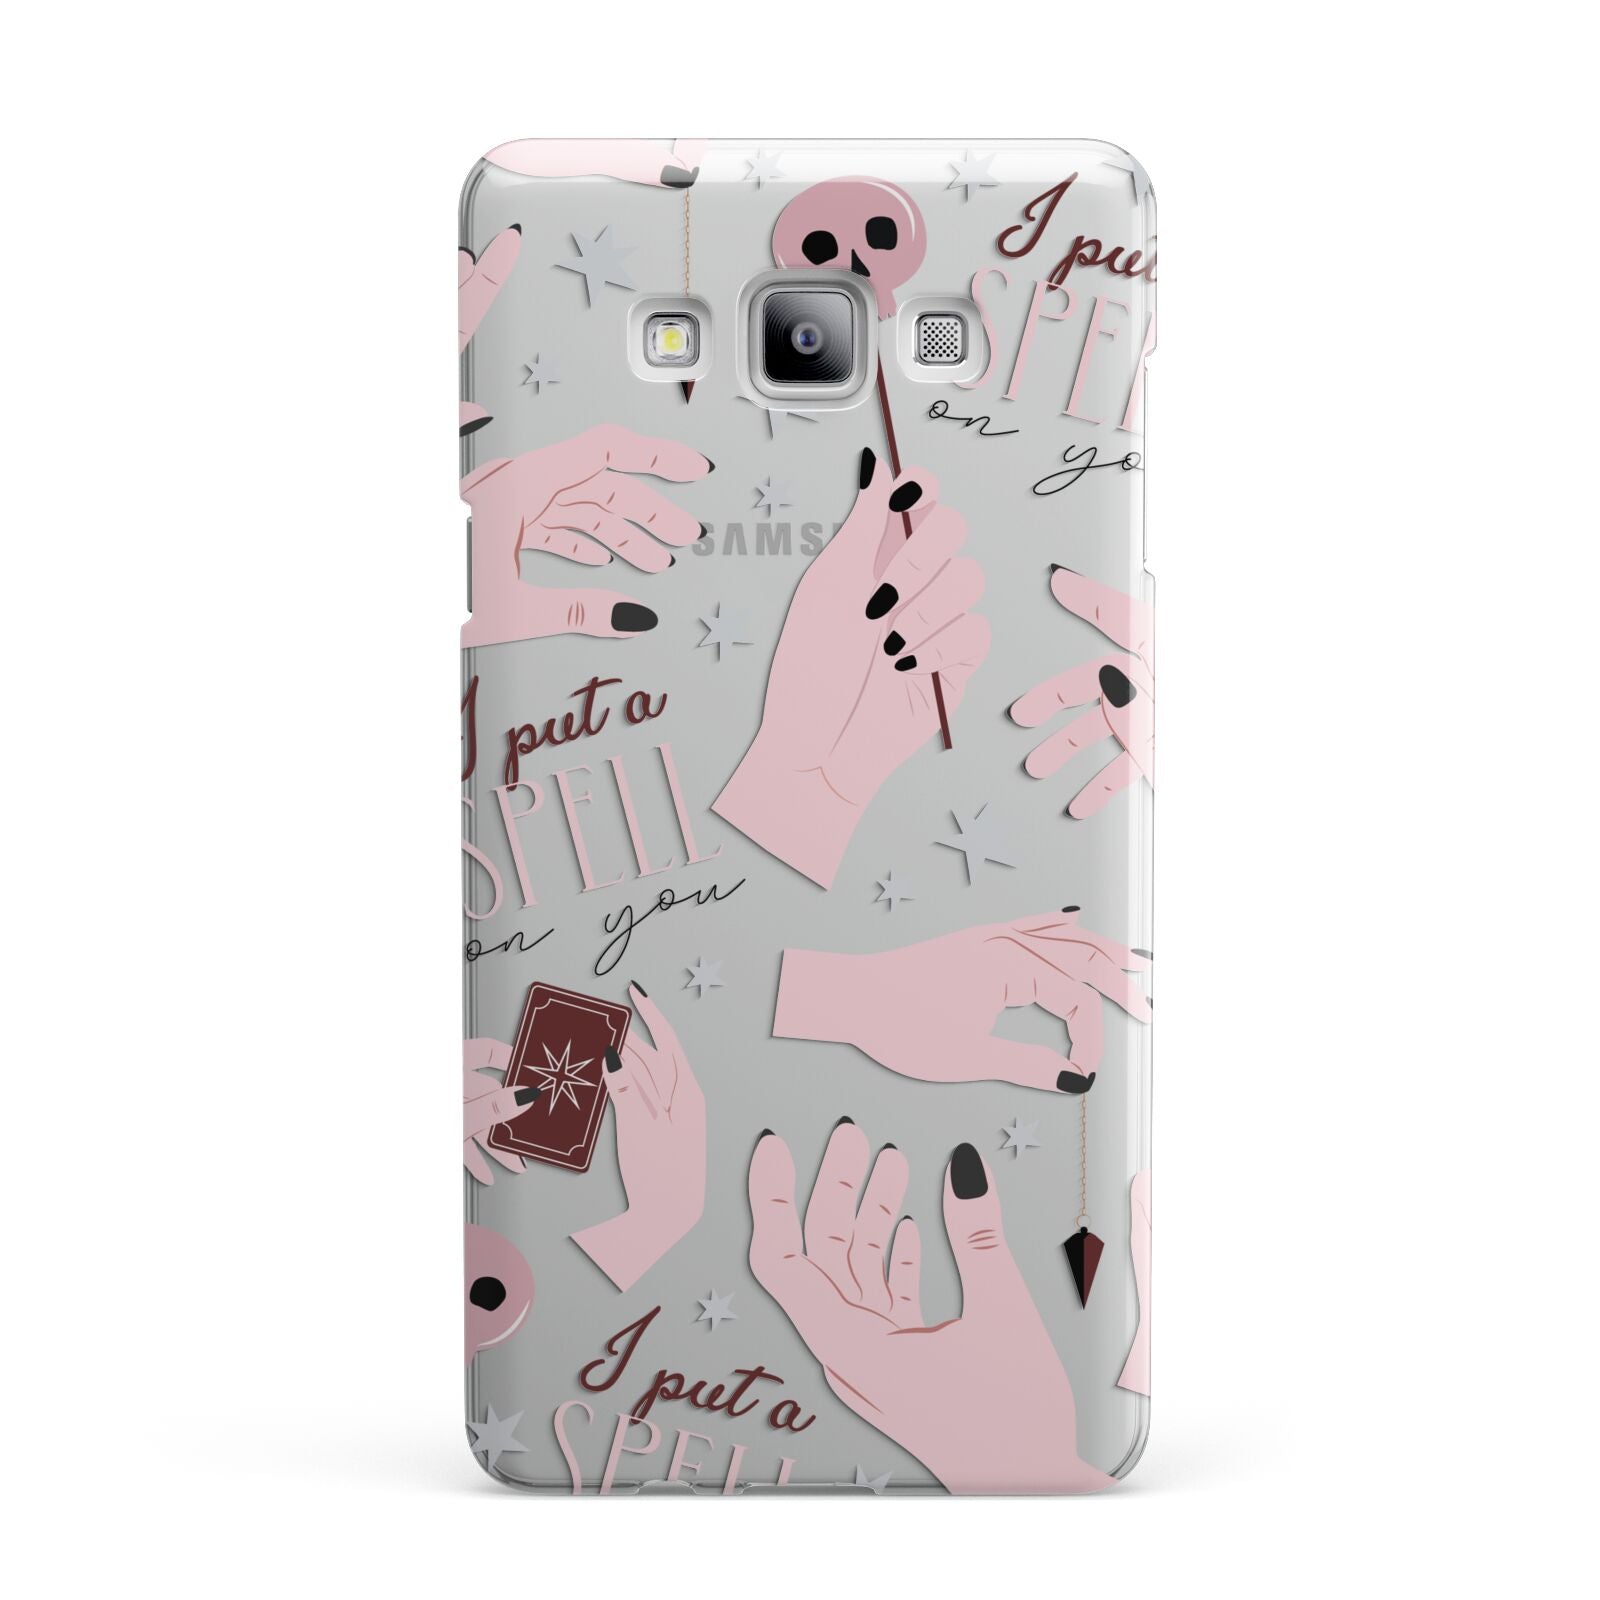 Witches Hands and Tarot Cards Samsung Galaxy A7 2015 Case